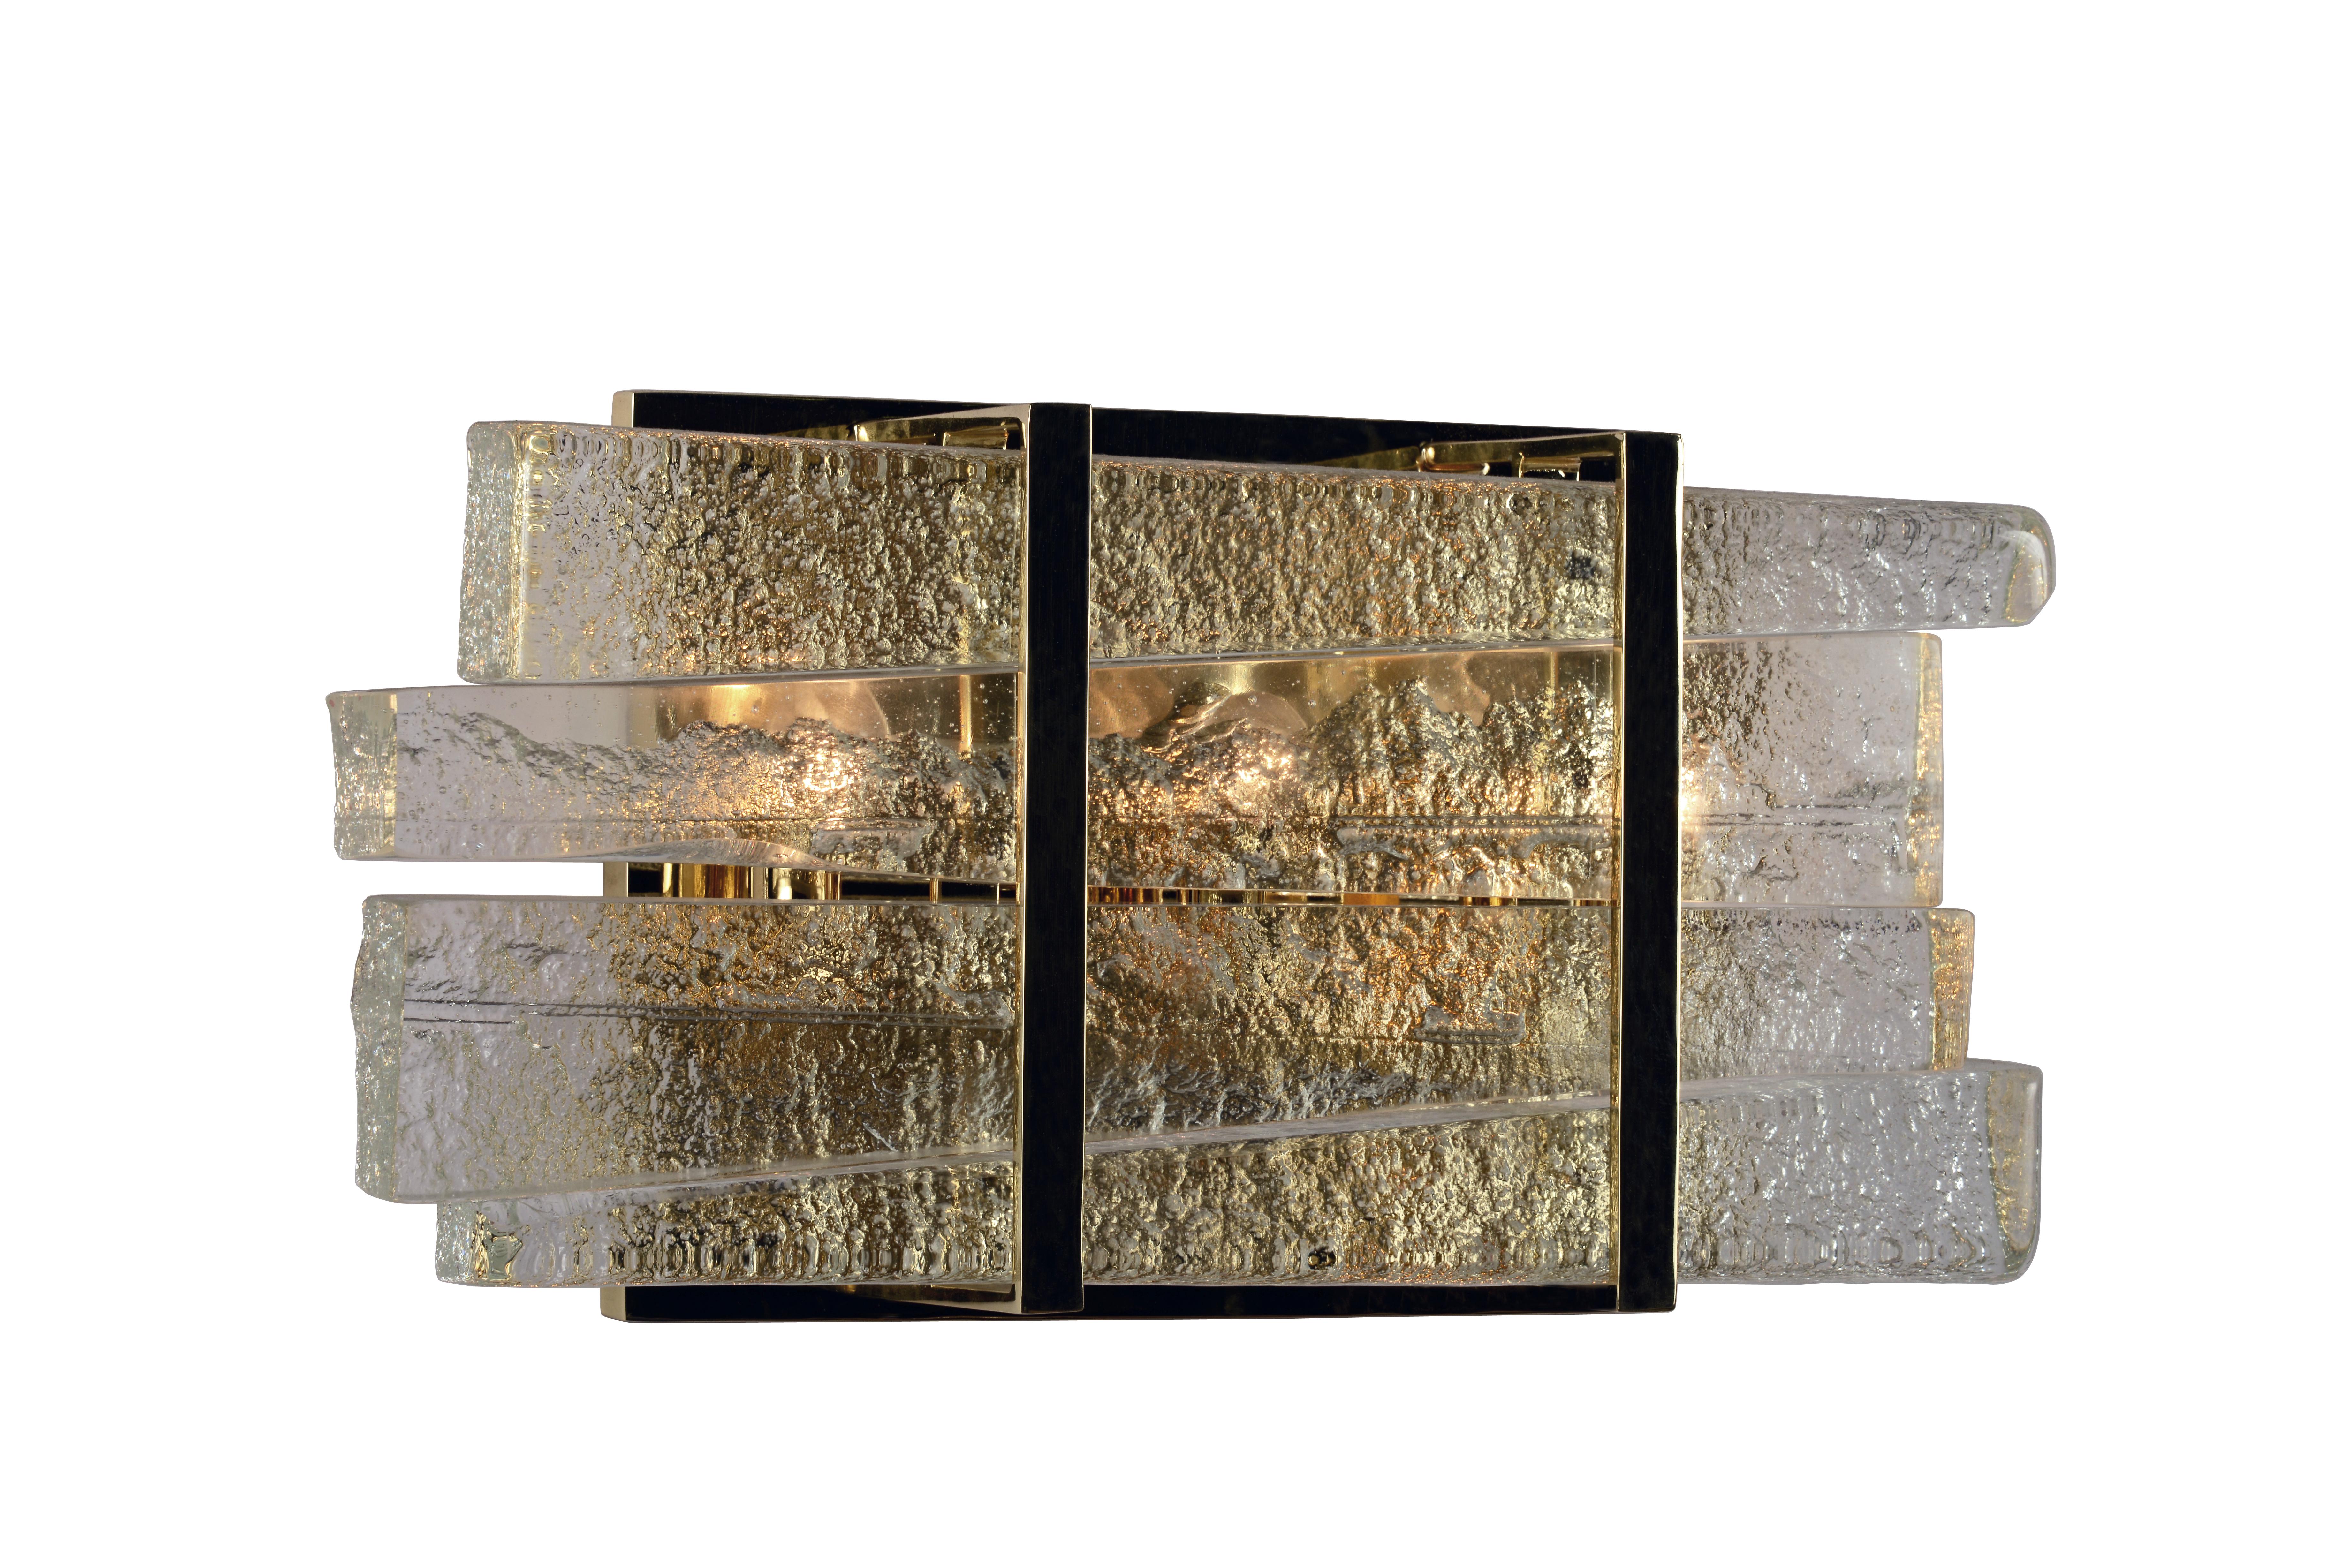 Rough-hewn blades of sand cast glass are stacked within refined architectural bands of mirrored brilliant bronze or natty nickel.

Models in the collection are individually hand-crafted by the skilled artisans in our studio. Custom versions tailored